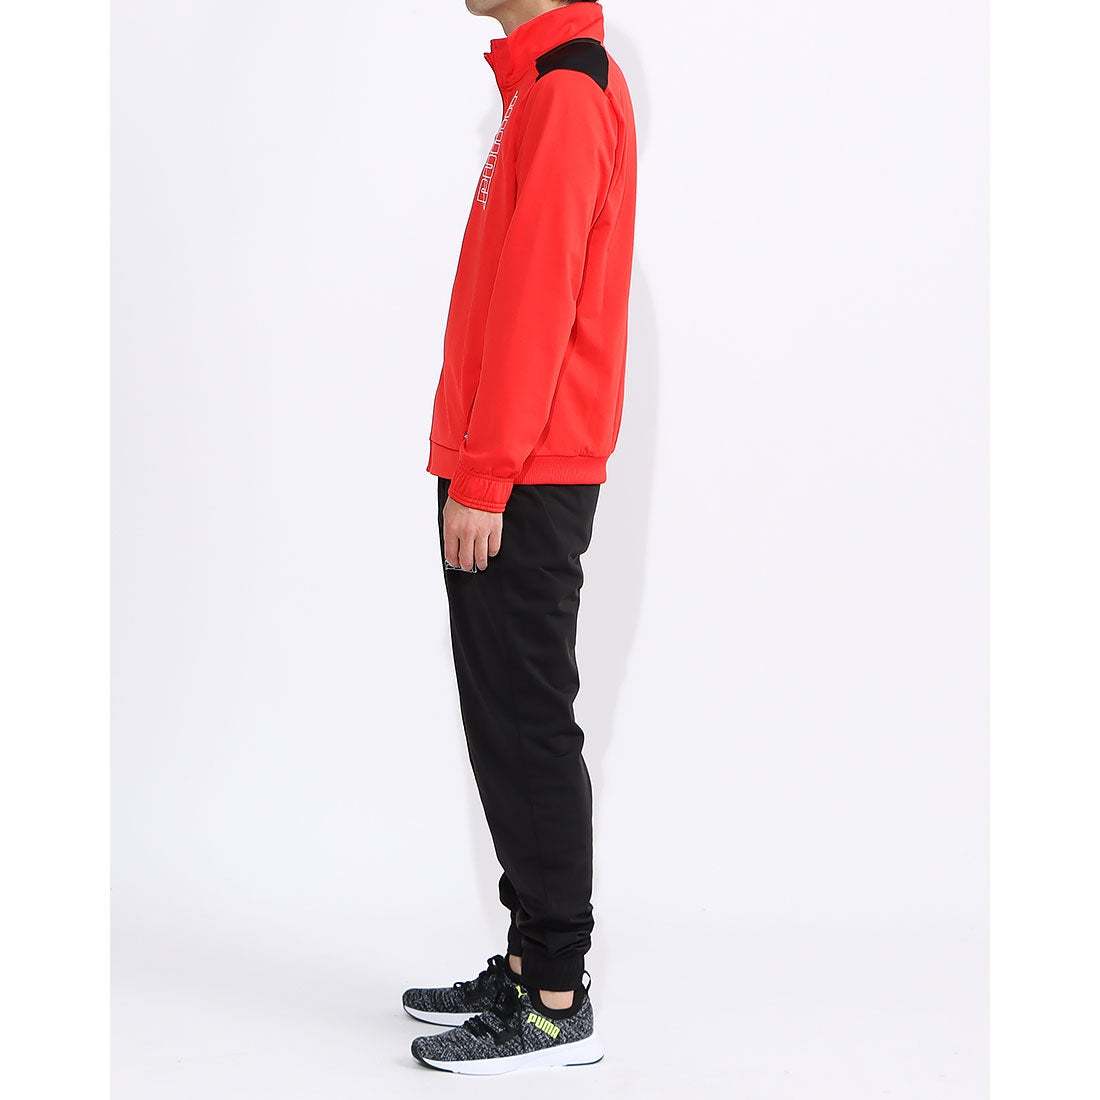  Puma graphic tricot to Lux -tsuL size red / black GRAPHIC stand-up collar jacket & pants jersey top and bottom set 